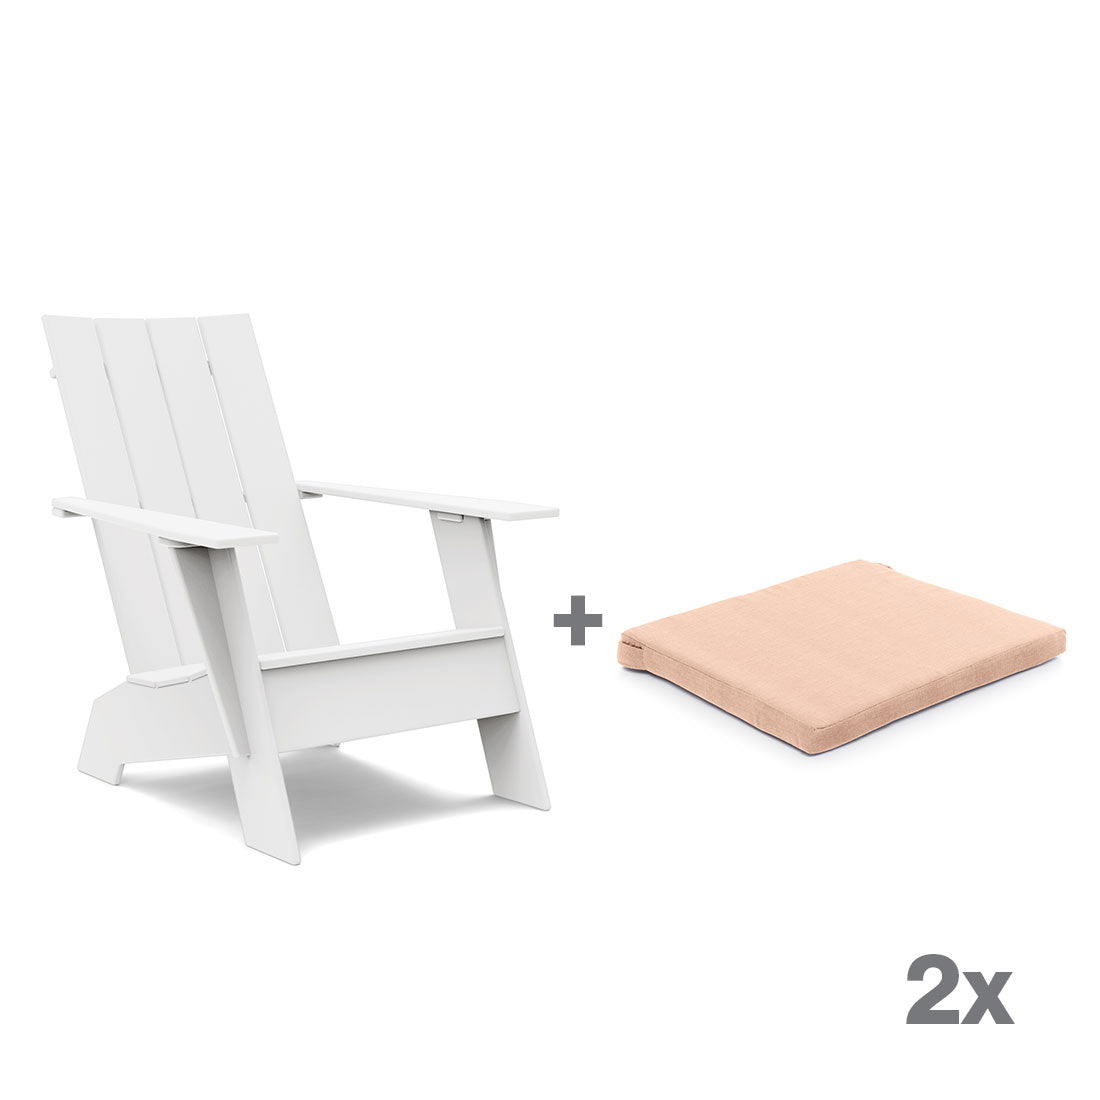 Adirondack Chairs with Seat Cushions Bundle, Overstock